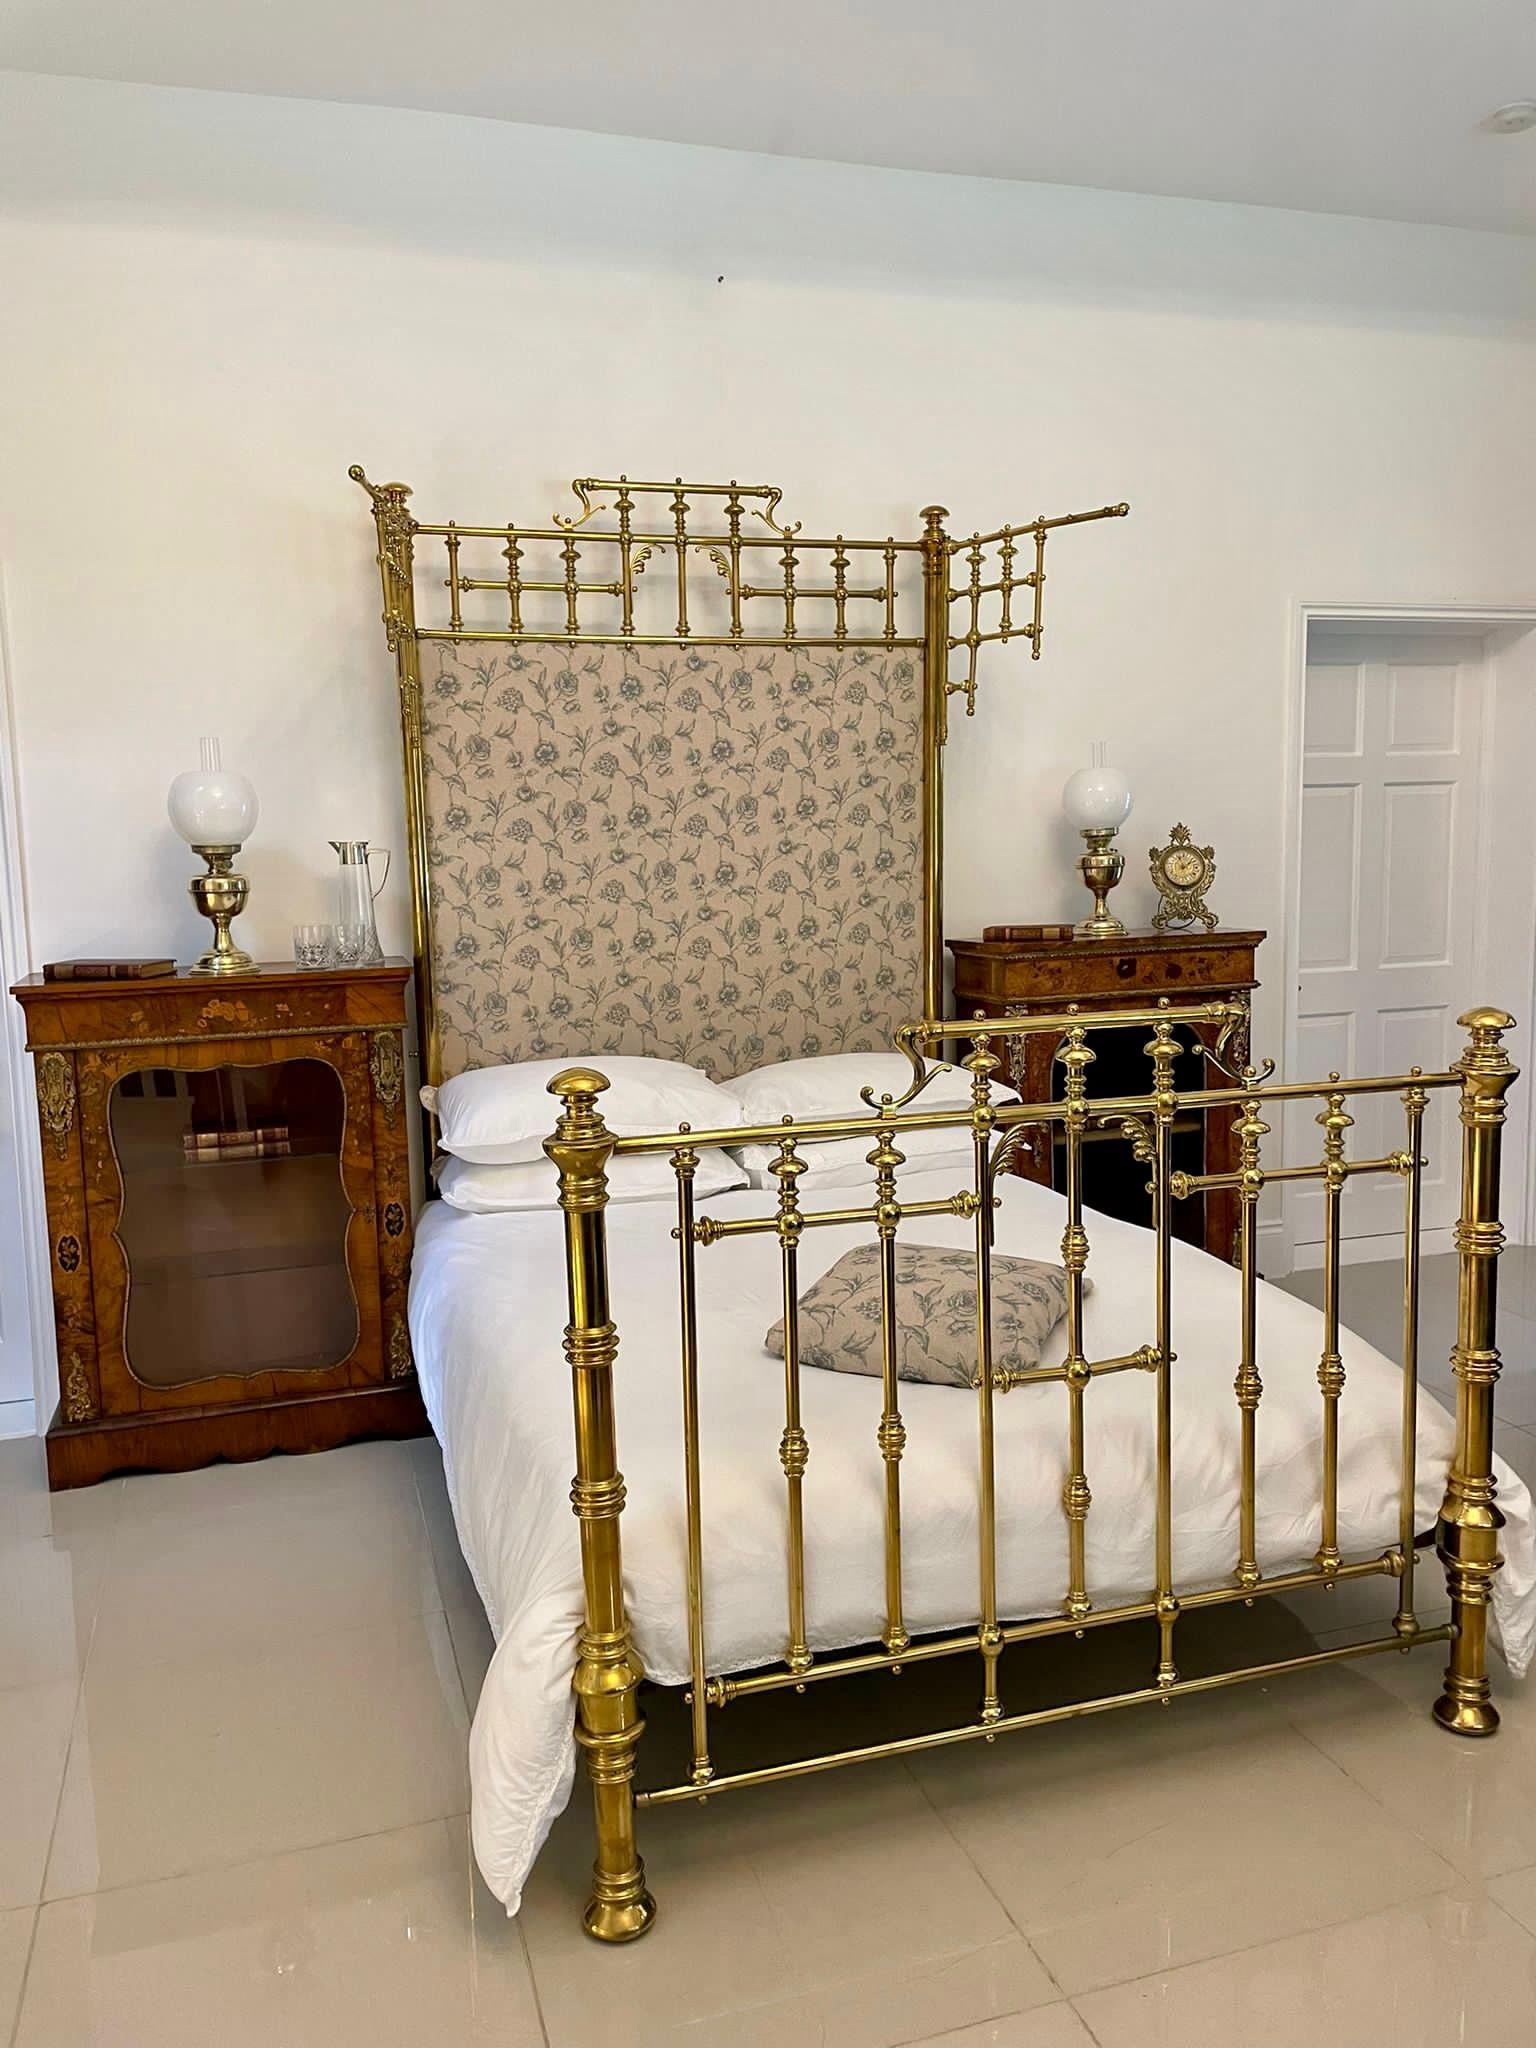 Magnificent exhibition quality antique Victorian gilded solid brass half tester double bed having a newly reupholstered back in a quality fabric flanked by two circular brass column posts with ornate swing out wings which can be used to hang fabric